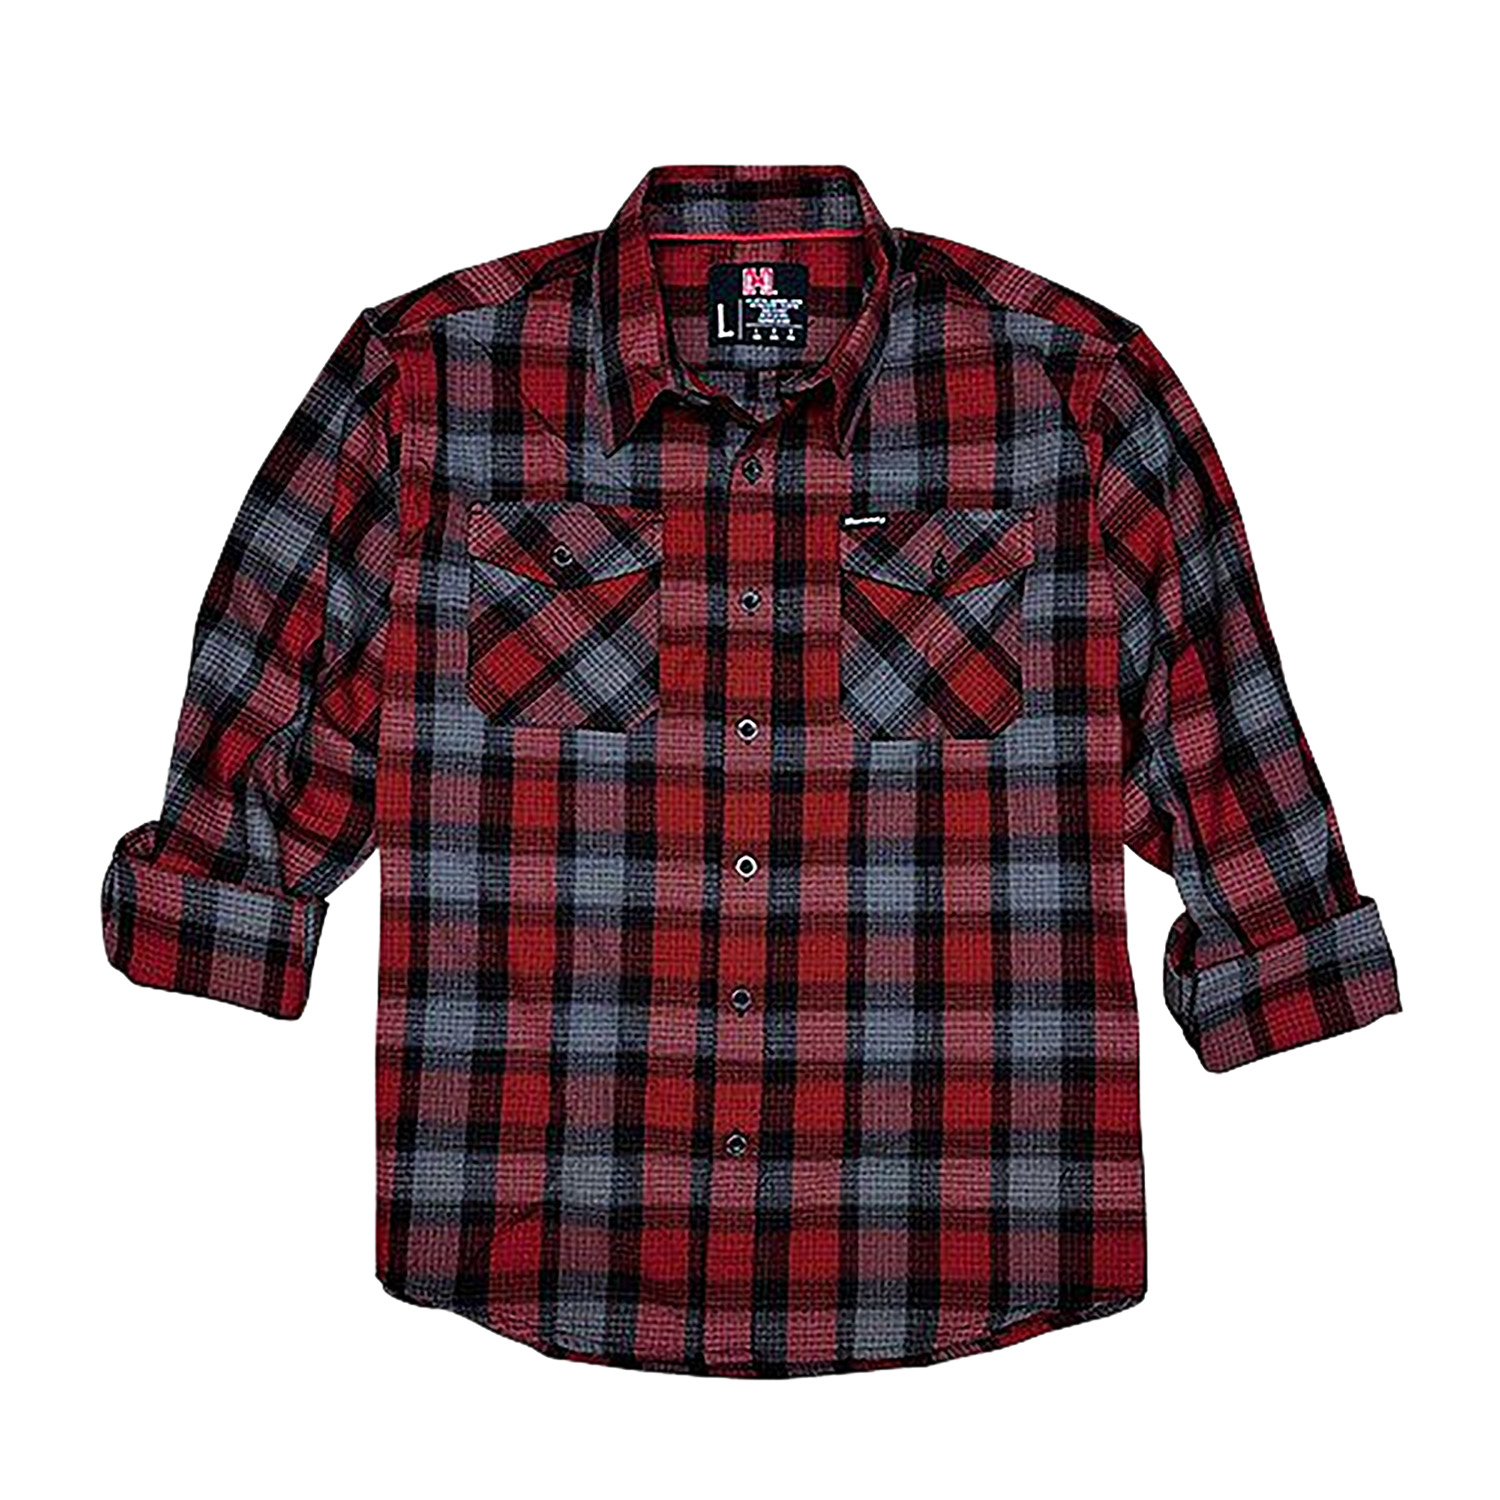 Hornady Gear 32193 Flannel Shirt Large Red/Black/Gray, Cotton/Polyester, Relaxed Fit Button Up